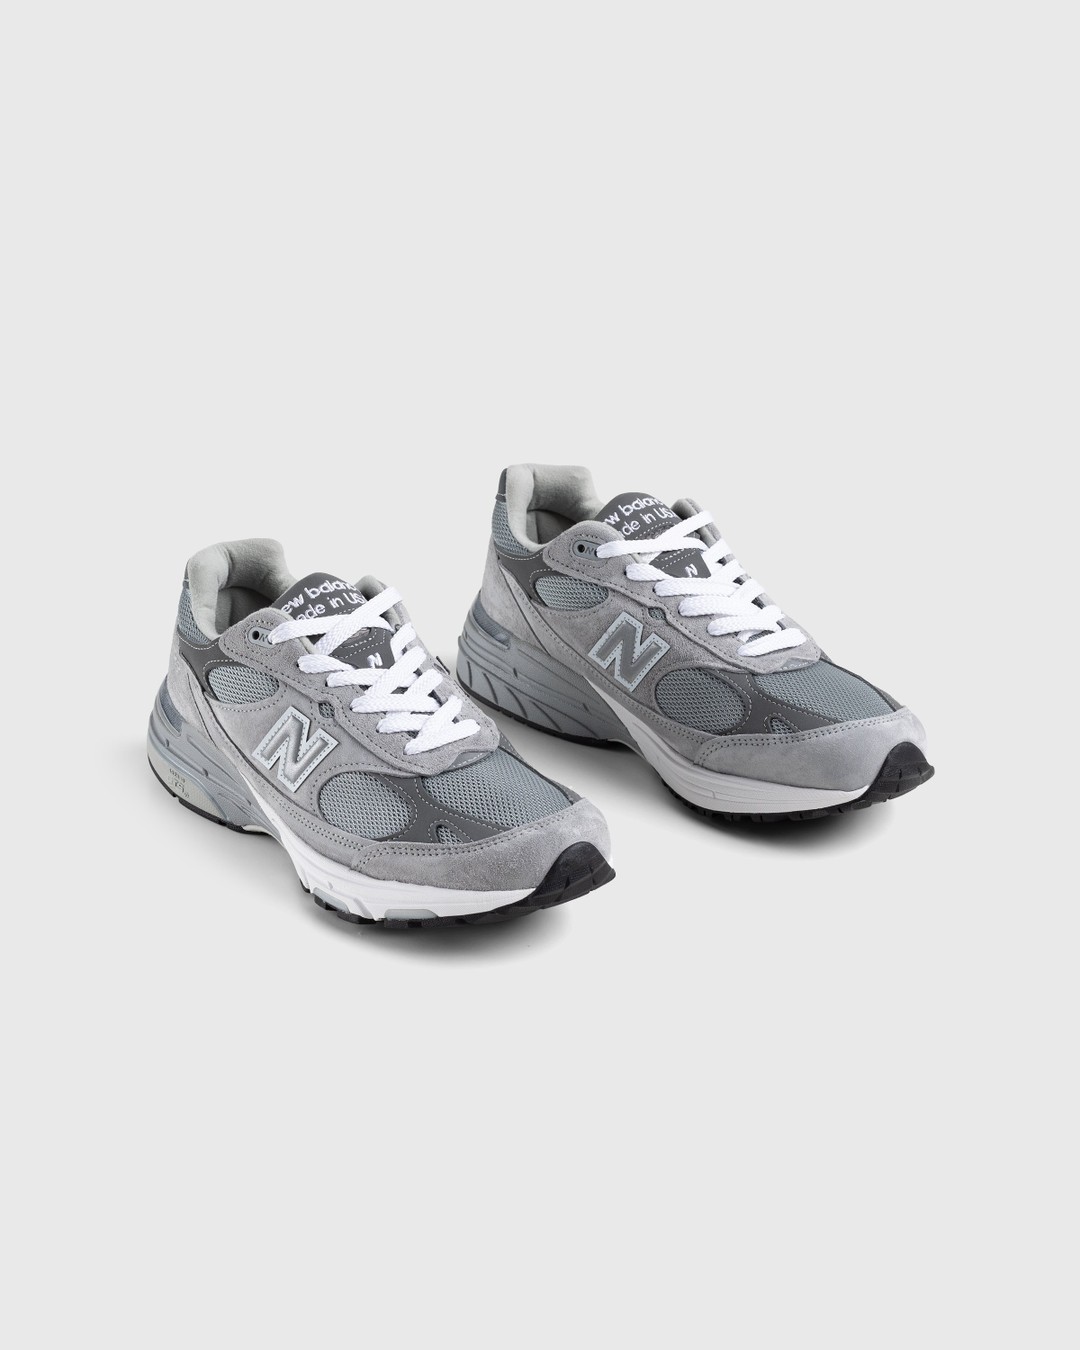 New Balance – MR993GL Grey - Low Top Sneakers - Grey - Image 3